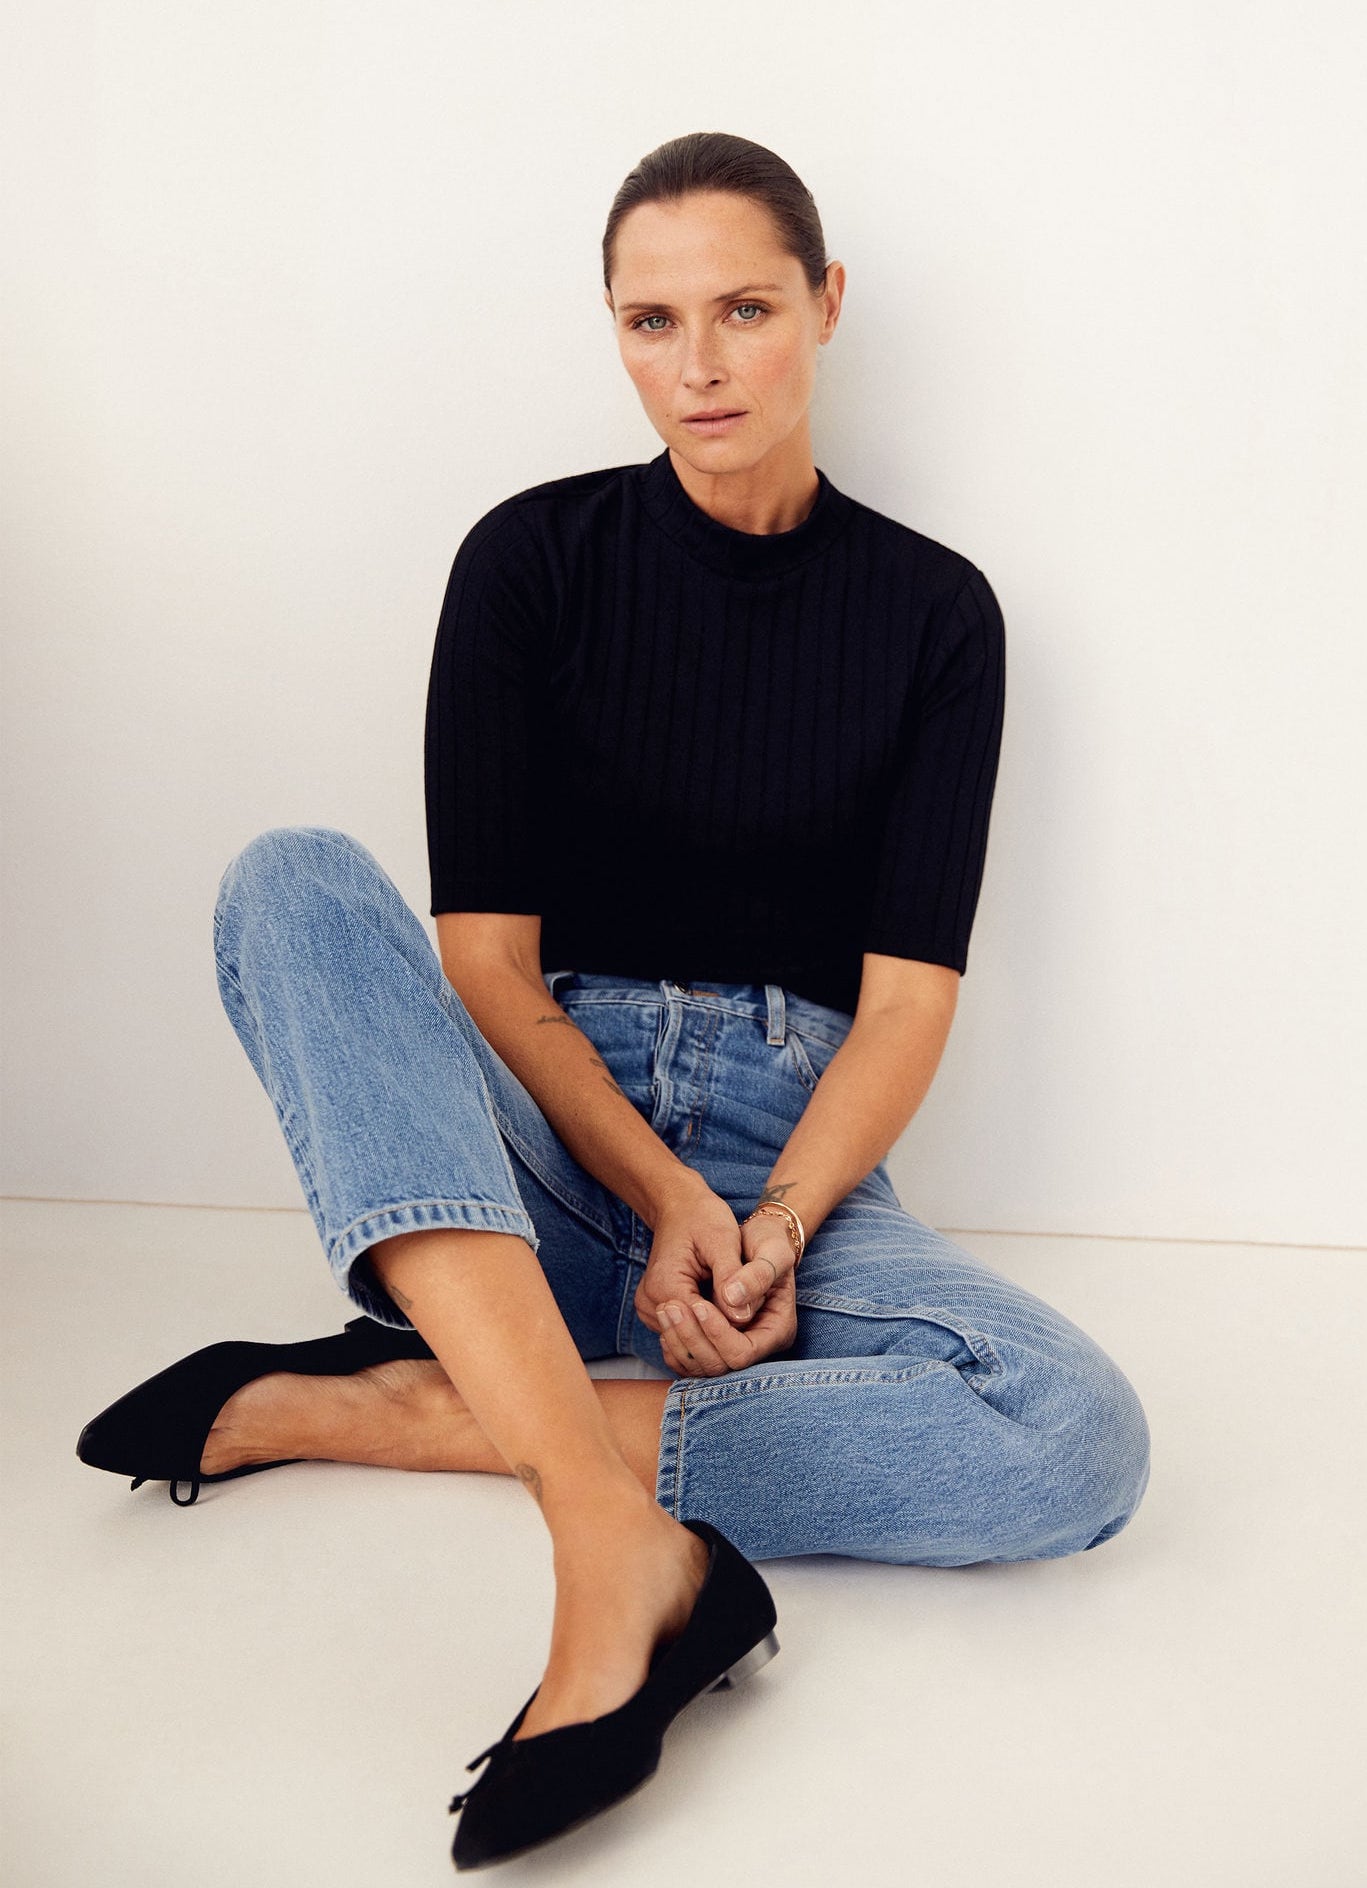 Classic casual chic spring outfit idea with shor sleeve black turtleneck mock neck top, straight-leg jeans, black ballet flats — Tasha Tilberg for Mango